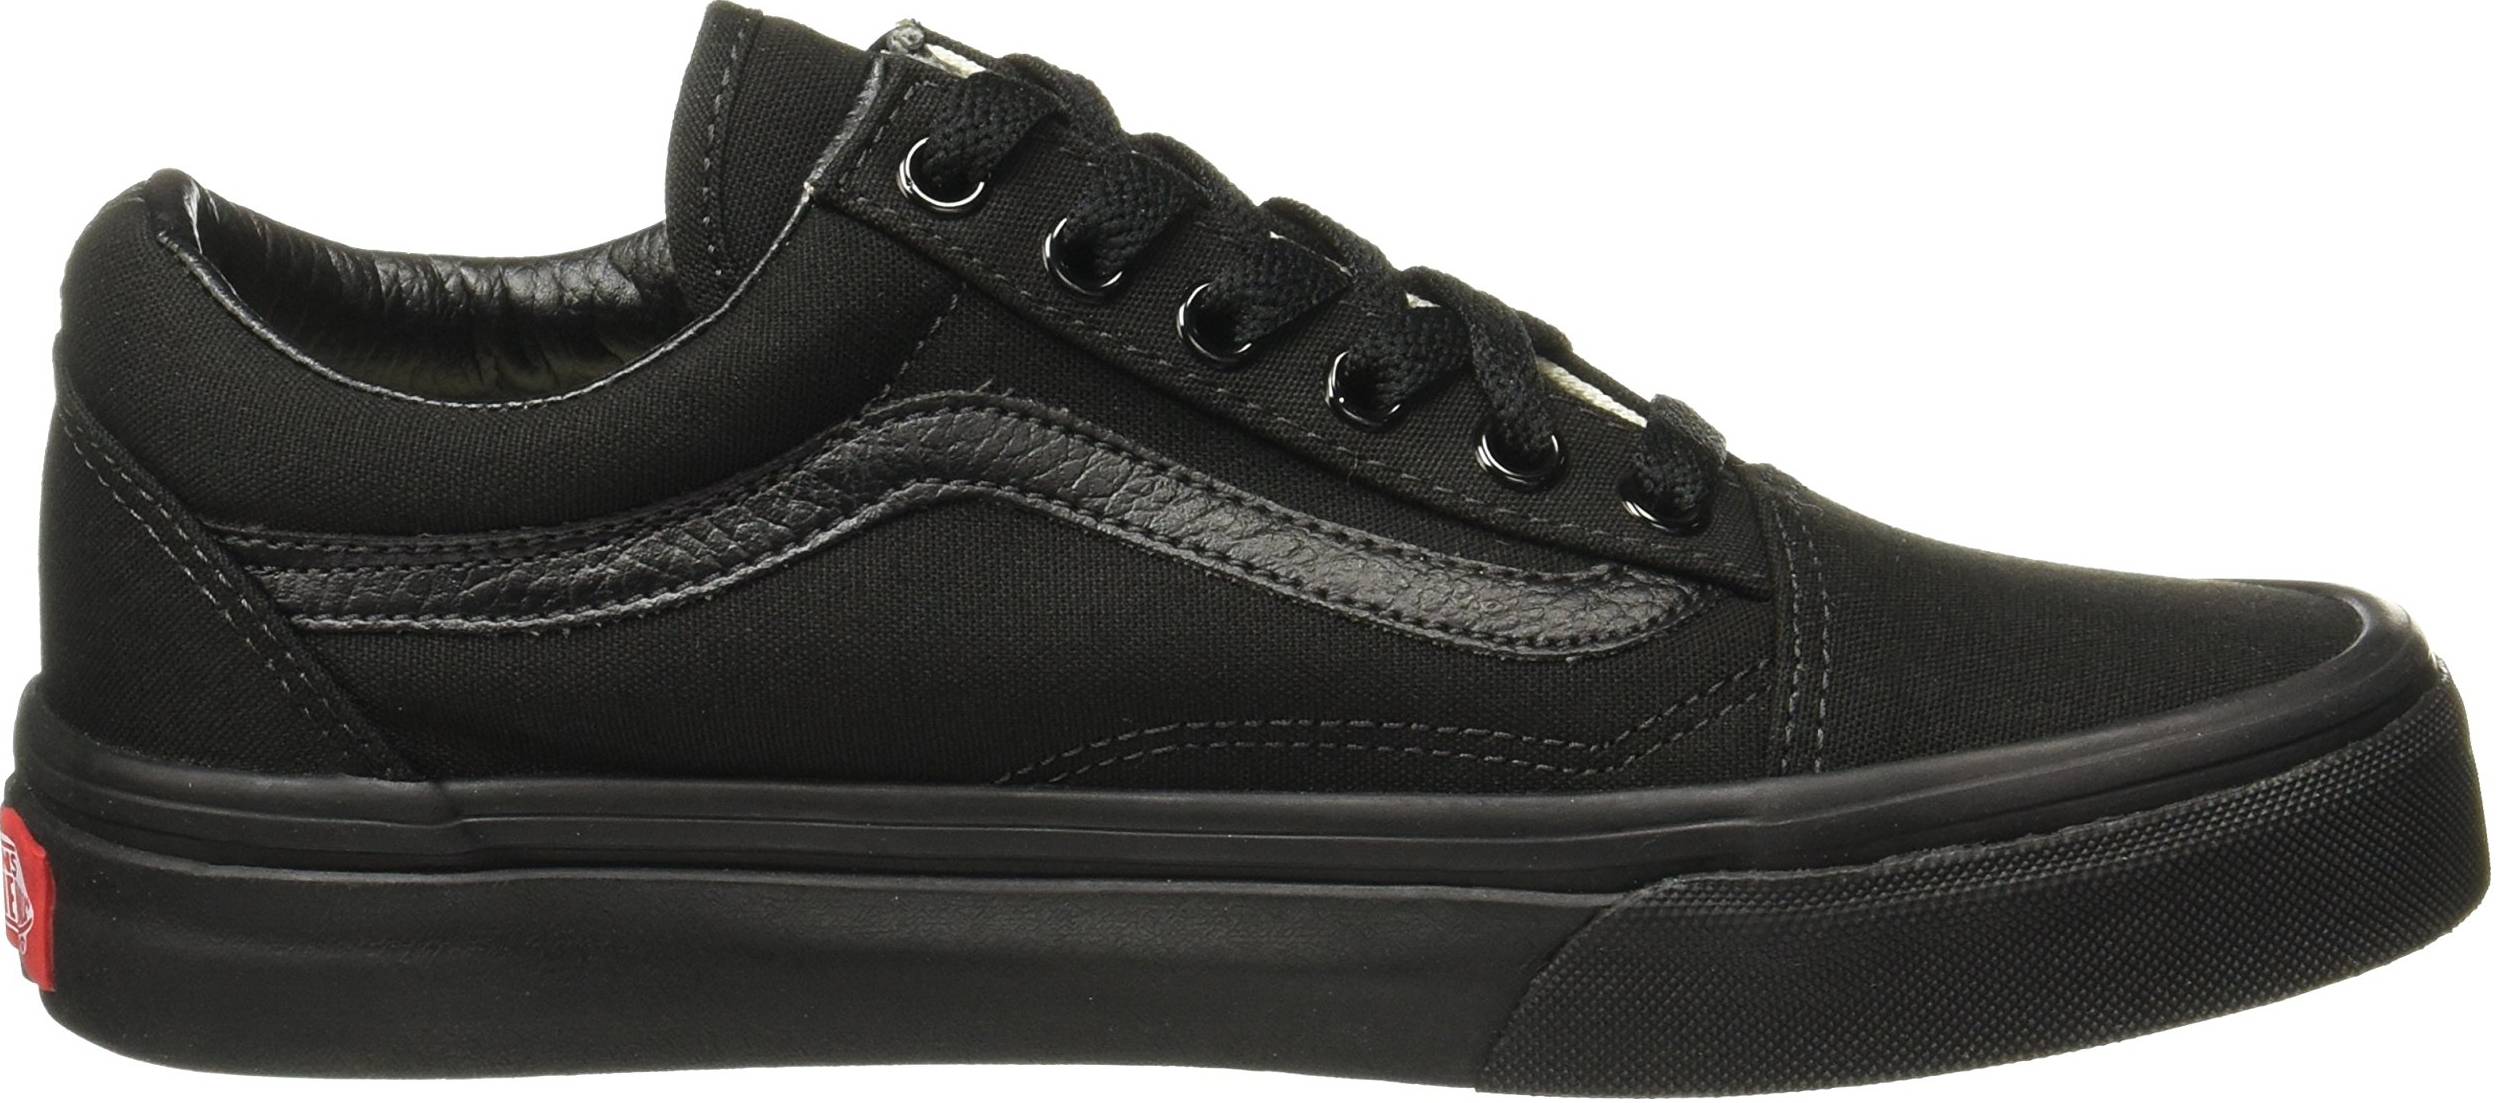 Save 31% on Vans Cheap Sneakers (147 